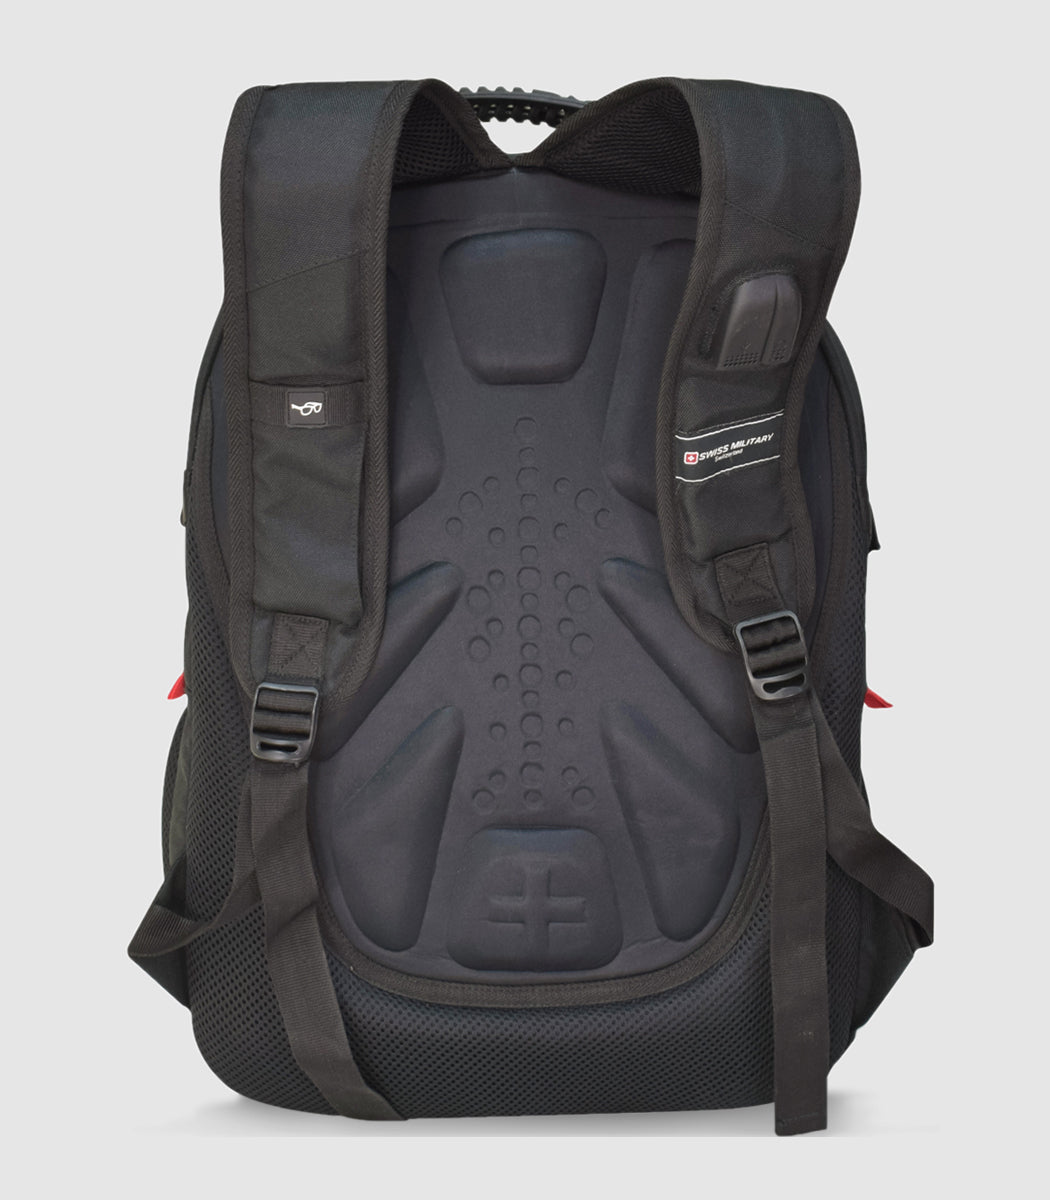 LBP76A – Laptop Backpack with USB Charging / AUX Port